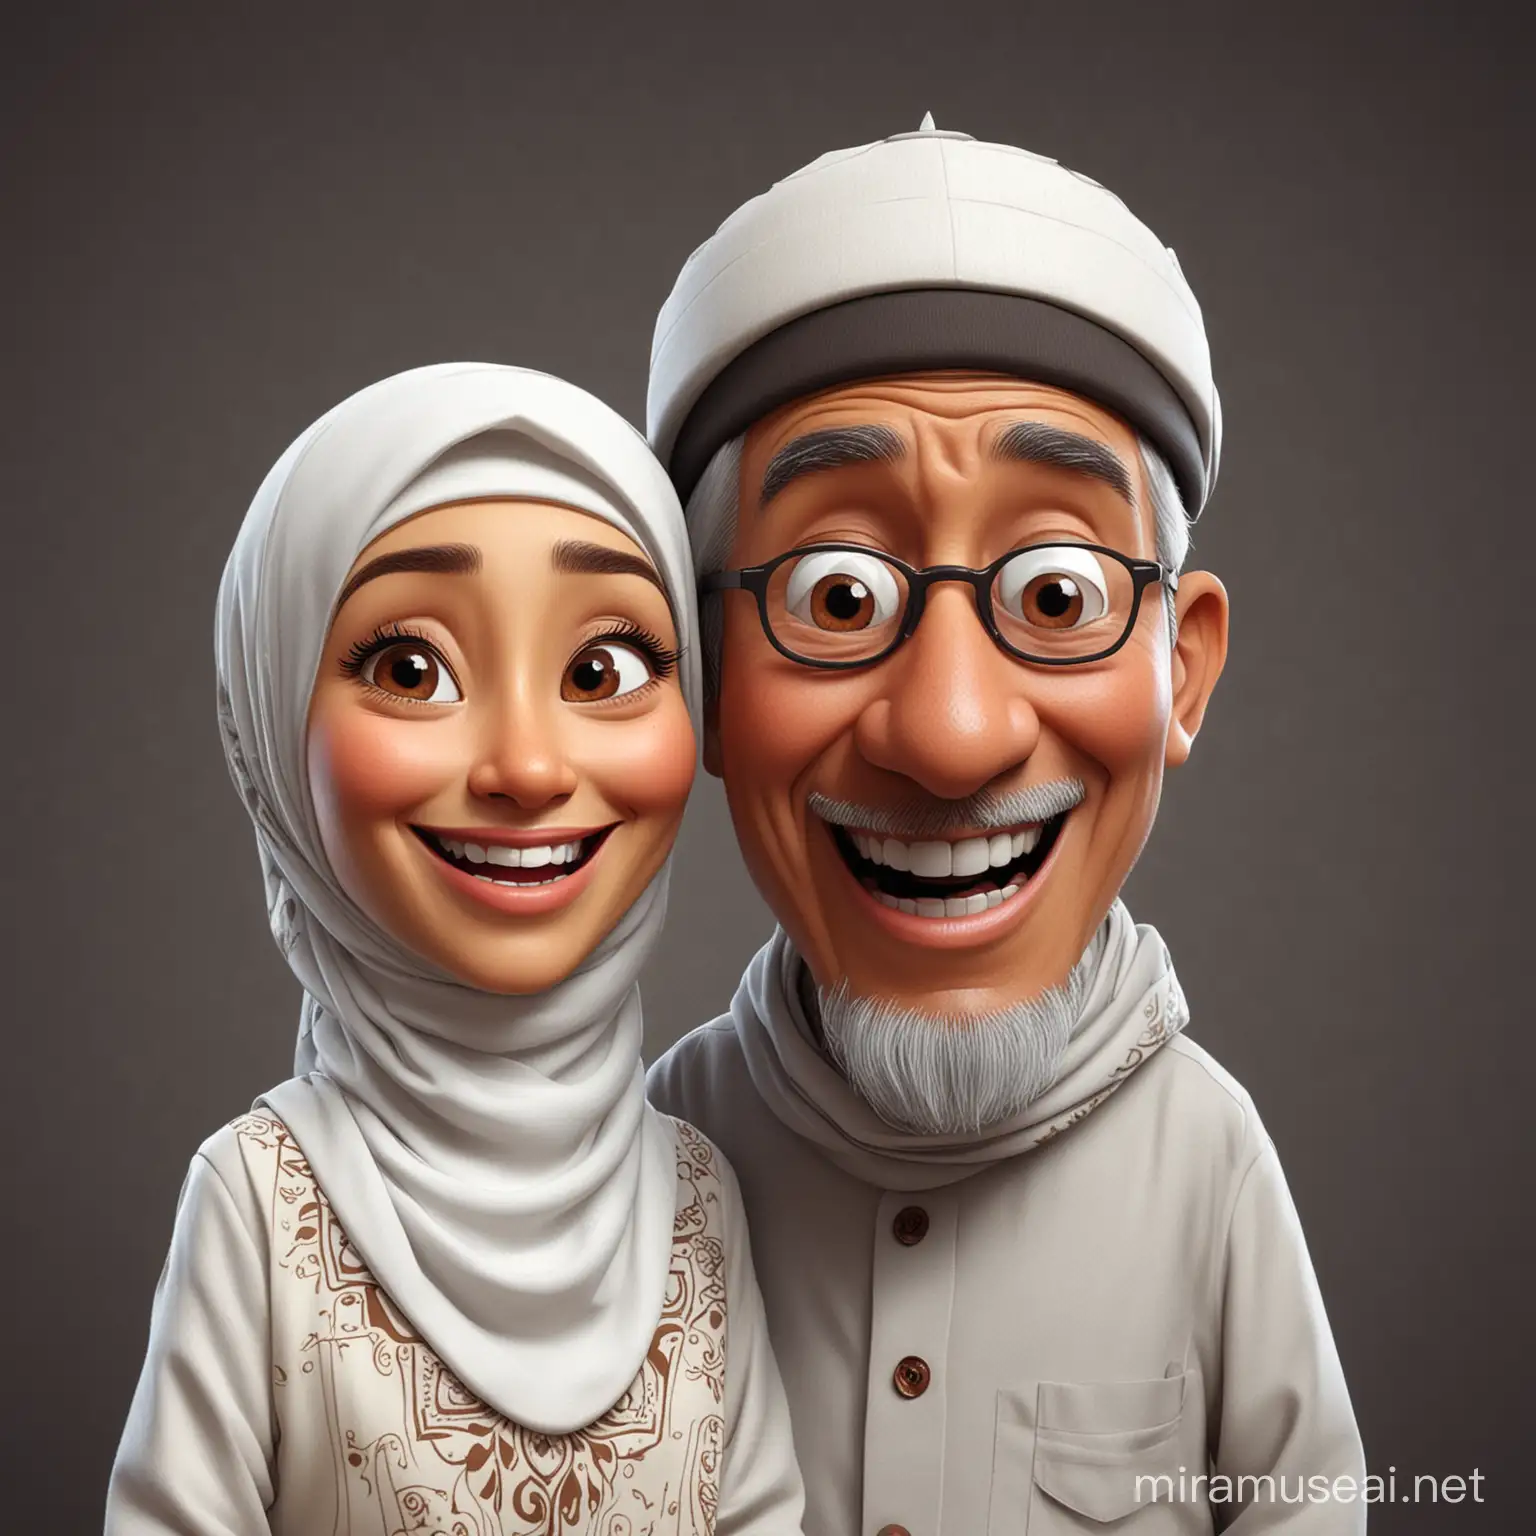 A cartoon caricature of A Couple Indonesian Age 70's, man wearing white moslem flat cap and woman wearing hijab, white moslem cloth with brown pattern and making fun faces in the style of Pixar, background is dark solid gray
